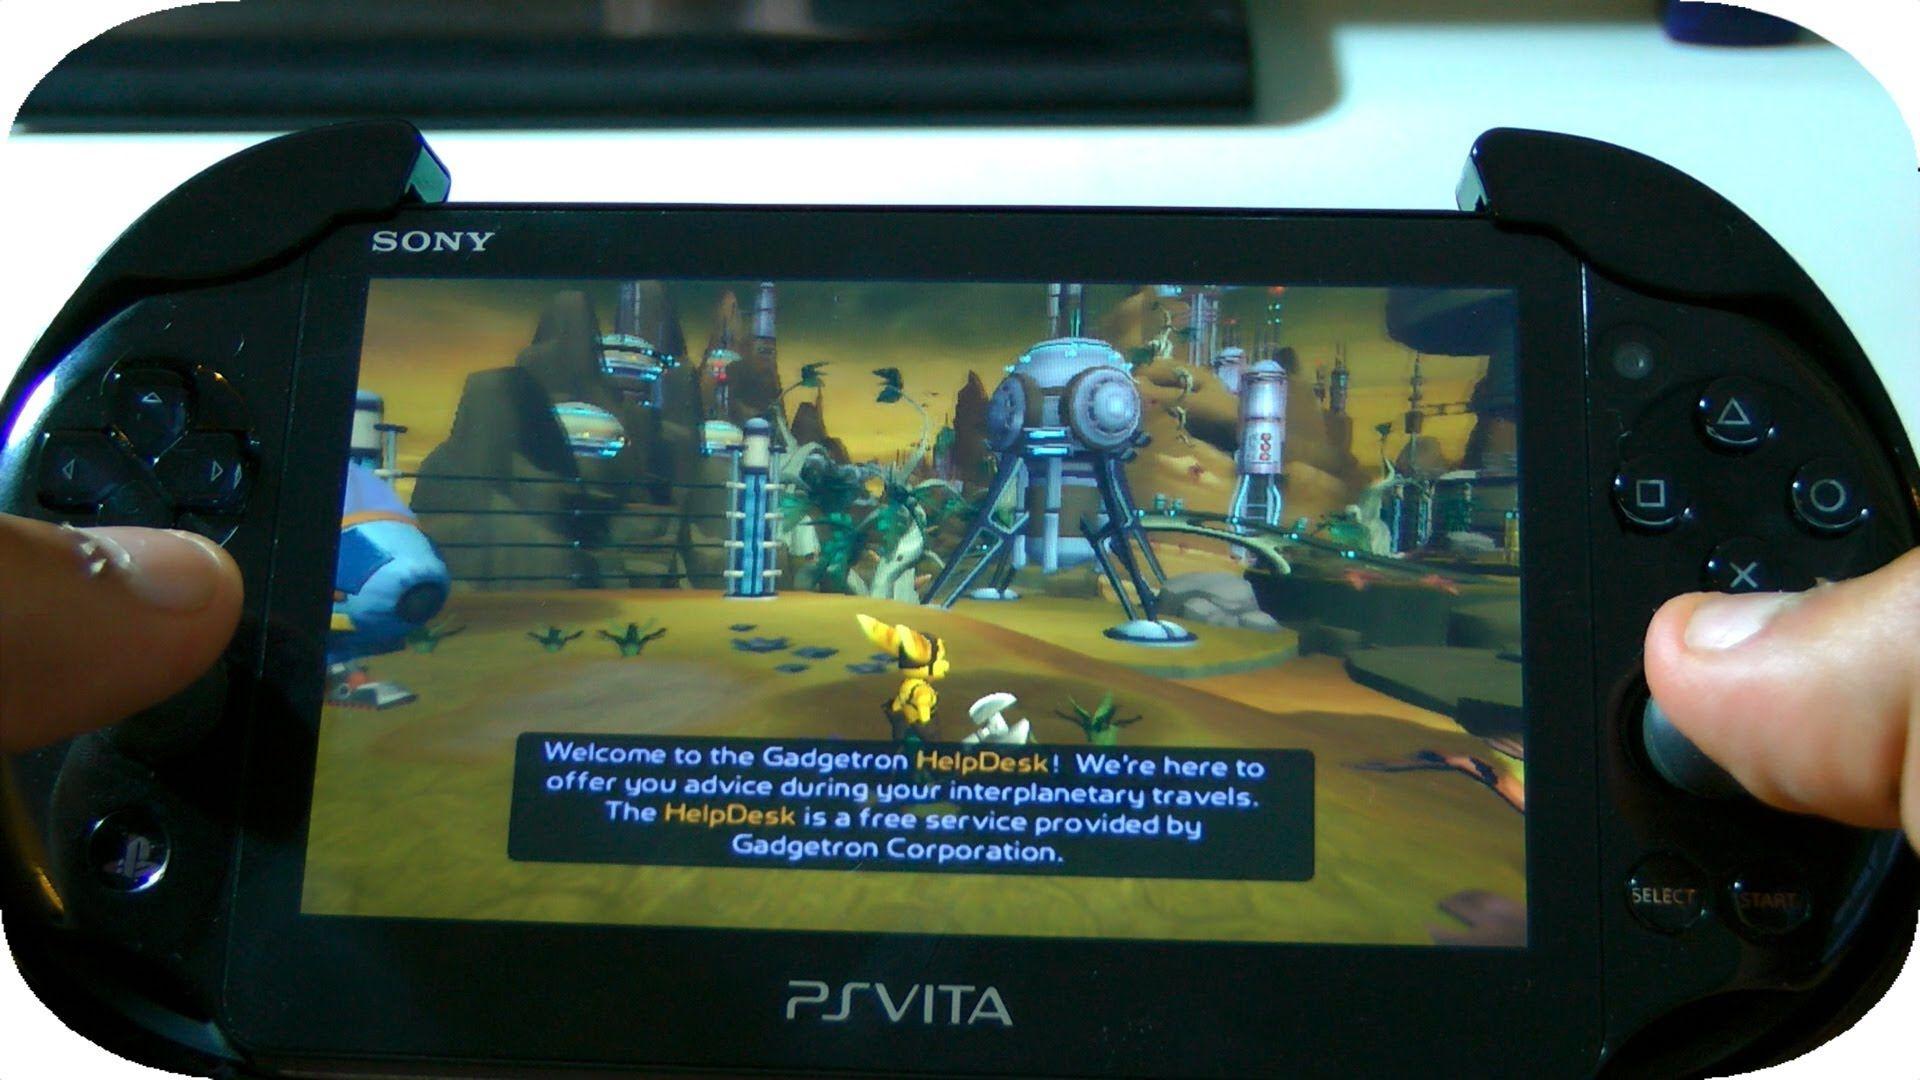 ratchet and clank trilogy sony playstation ps vita game